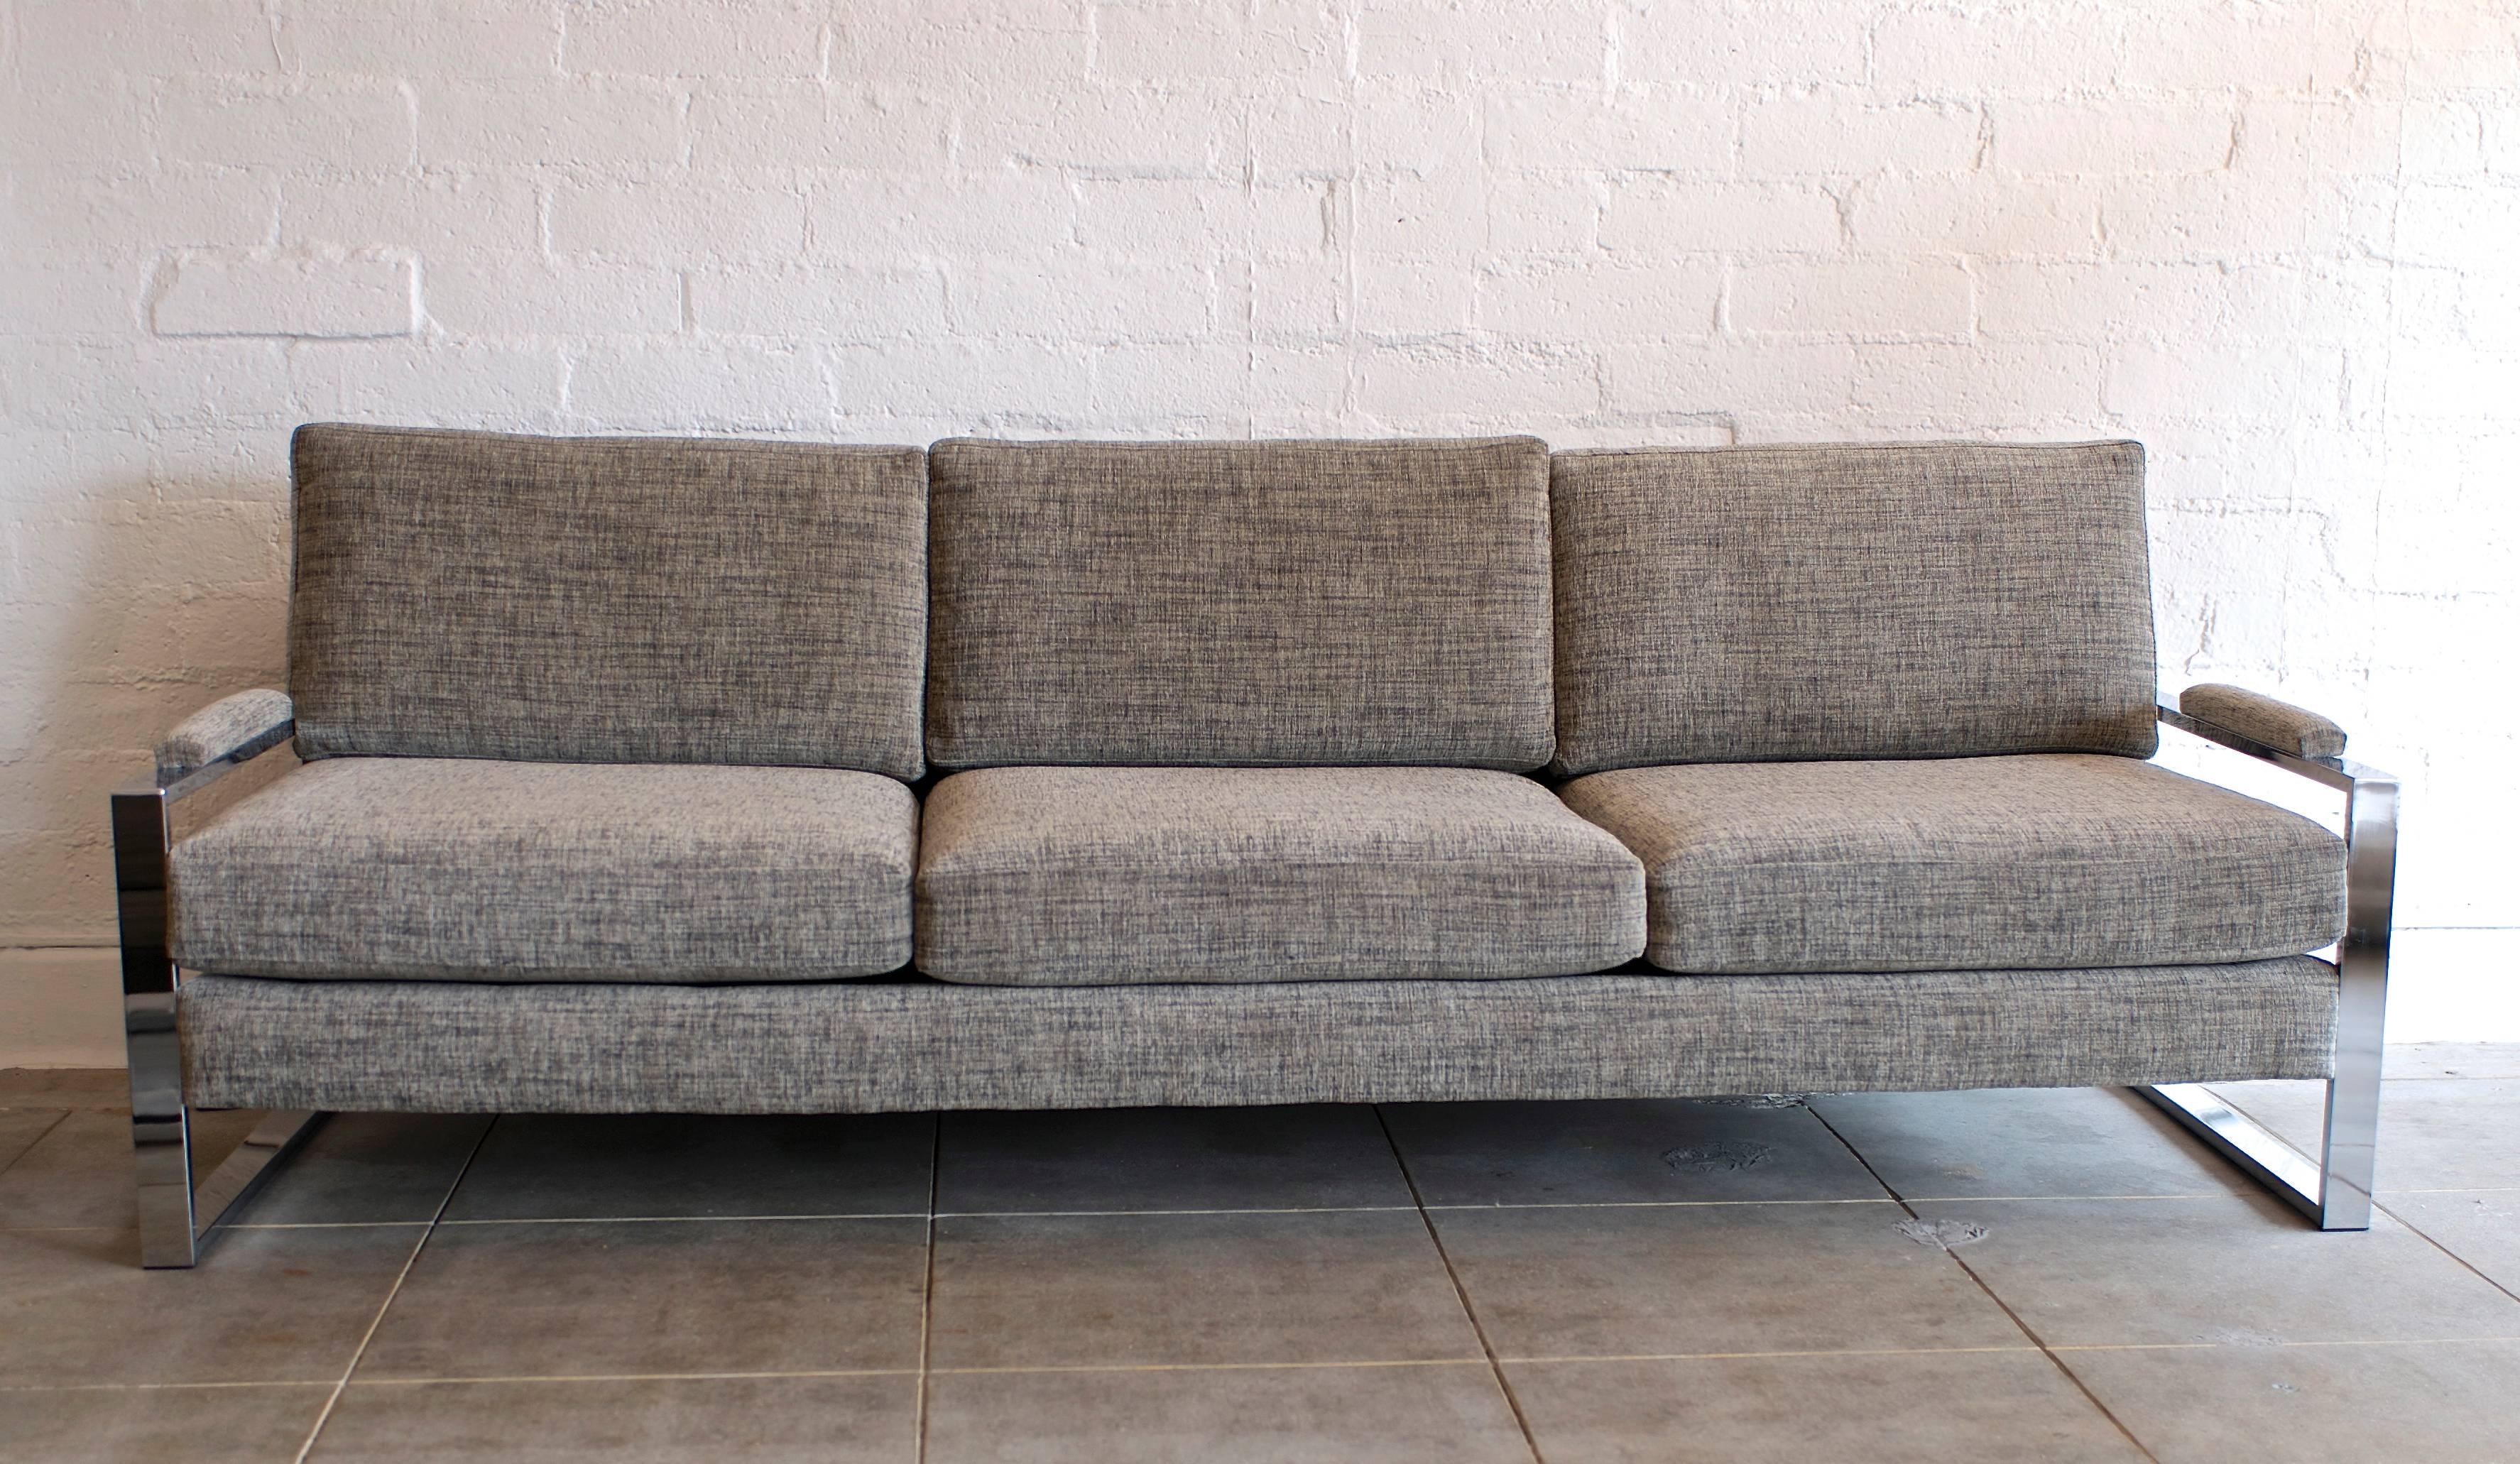 This handsome low slung Milo Baughman seating group is comprised of a three seat couch and a lounge chair. They have been completely redone with new foam and reupholstered in a handsome pewter grey weave much like a mens suiting fabric. The side